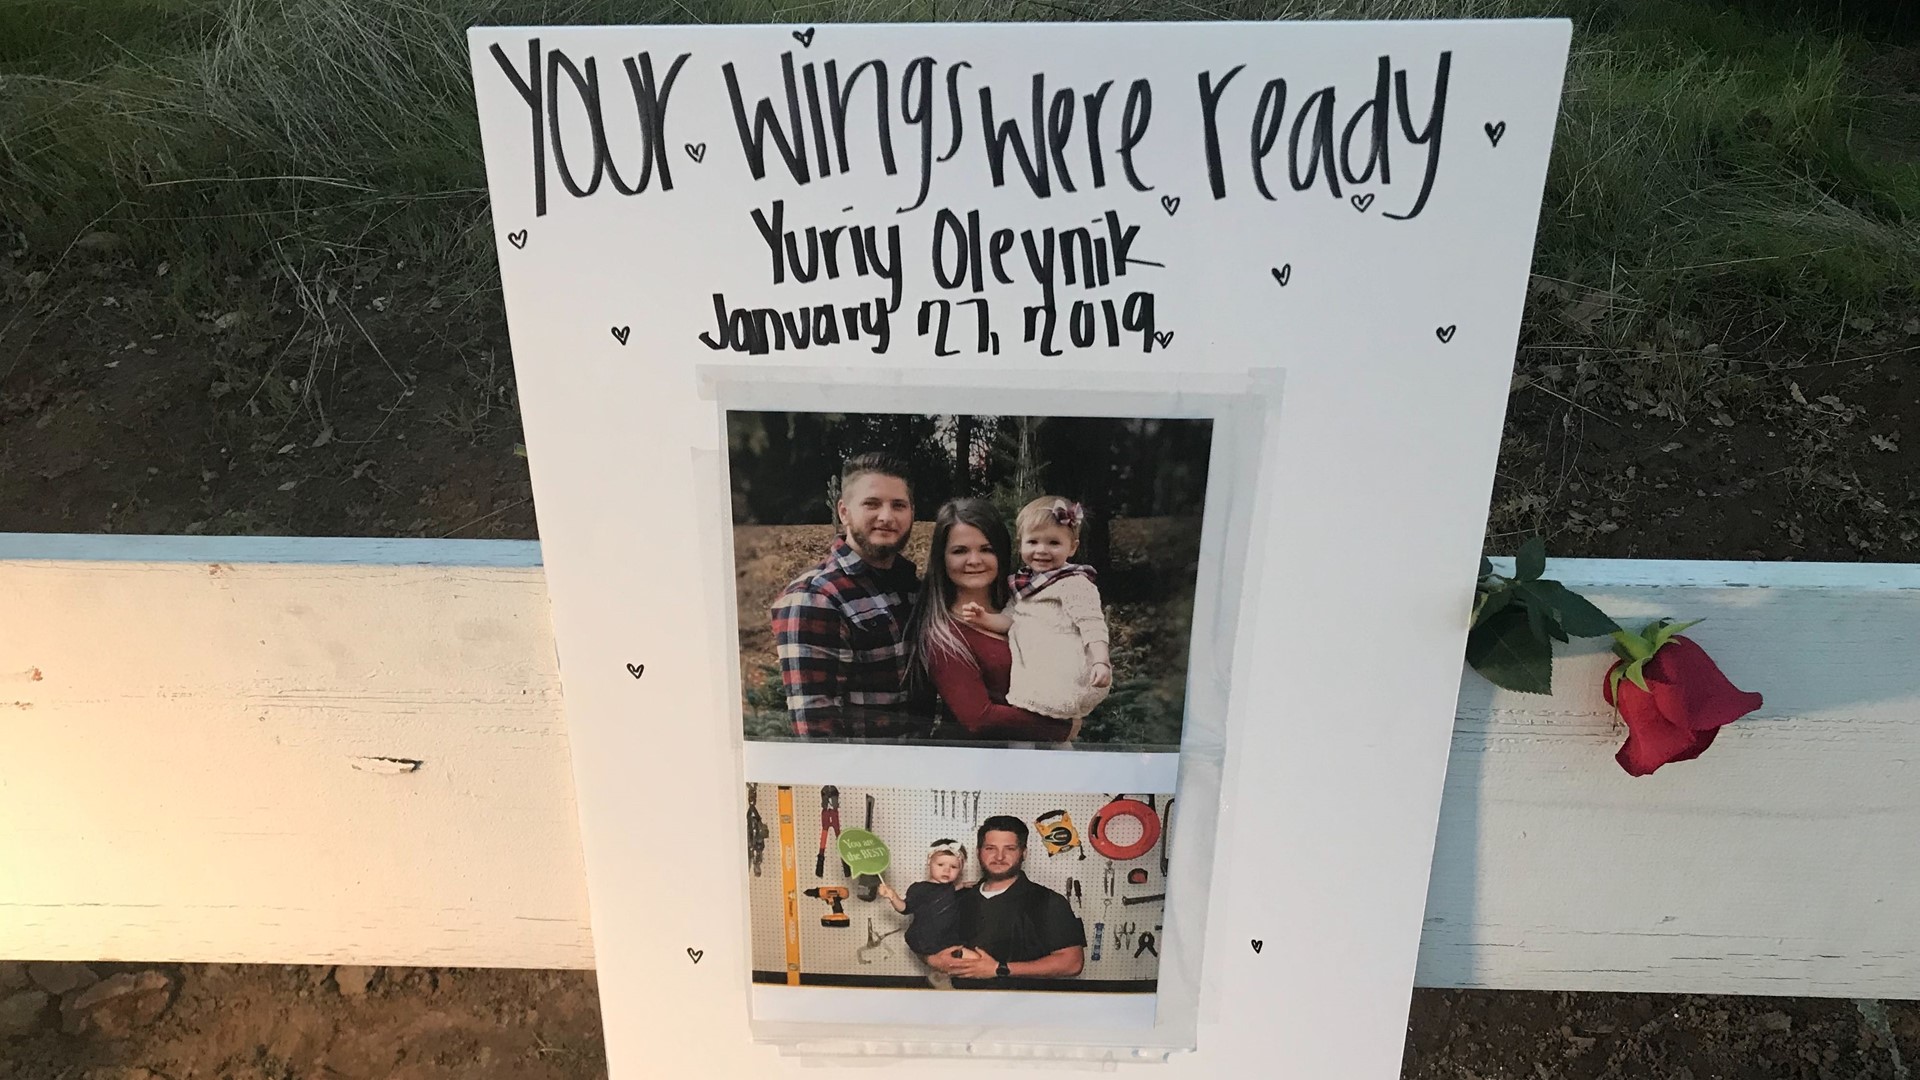 A 27-year-old motorcyclist man was hit and killed in Antelope on Sunday and the driver who hit him took off. On Monday night, family and friends are gathered to remember Yuriy Oleynik, who they say was a beloved member of the community.